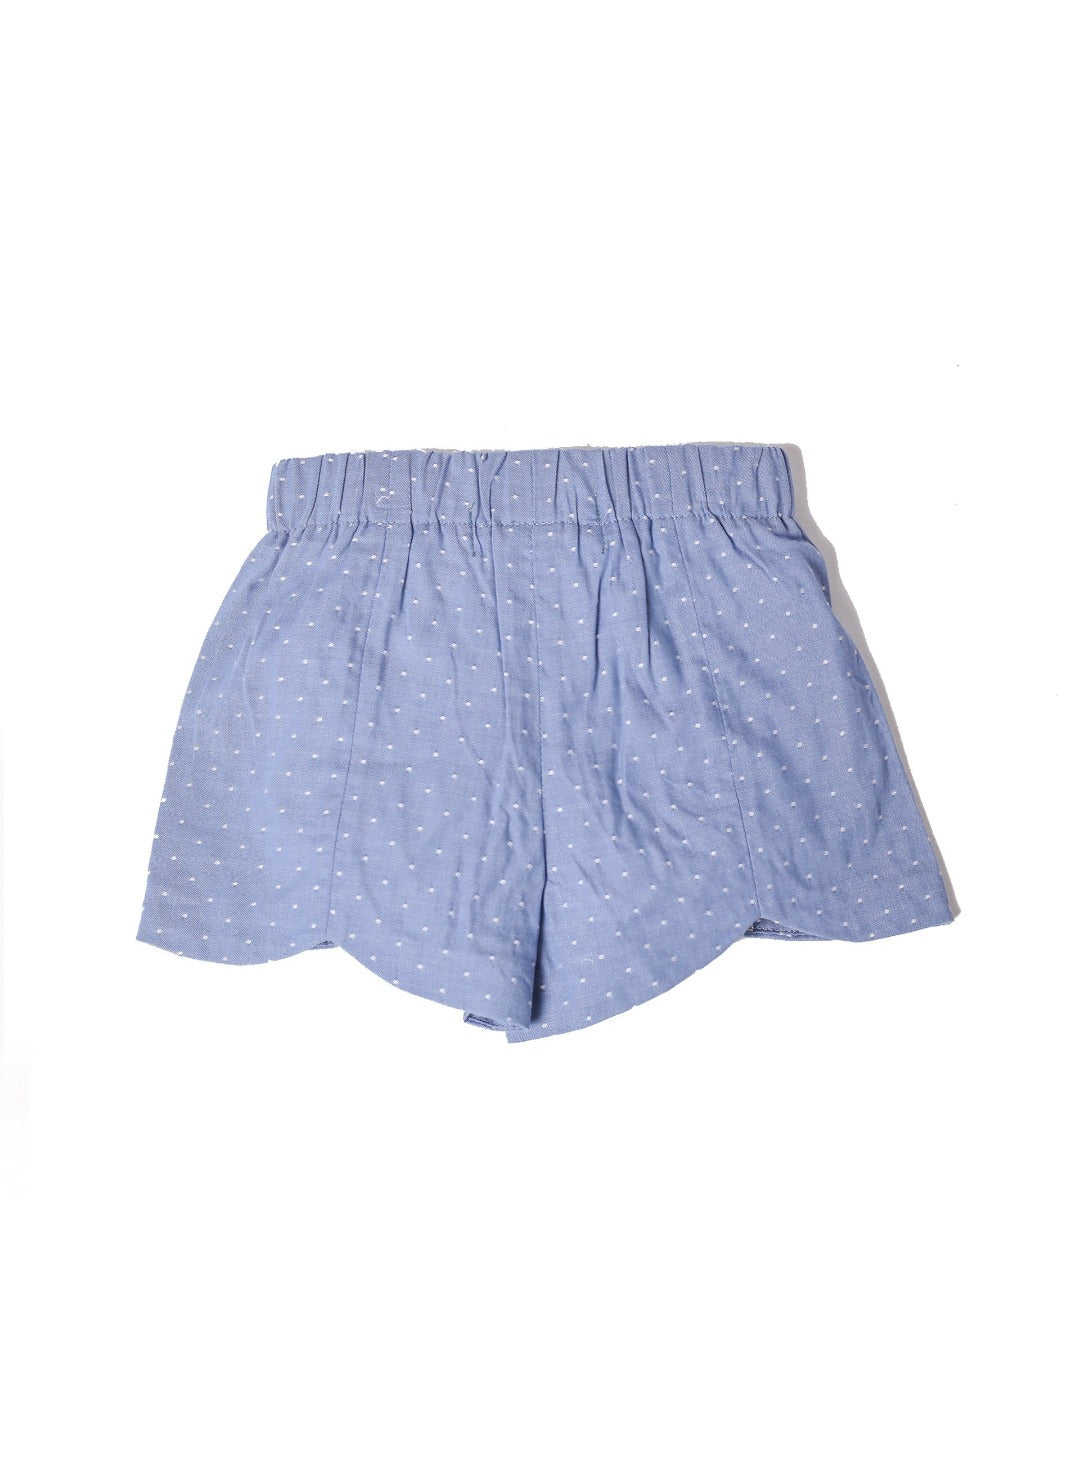 washed blue shorts with mini white dots